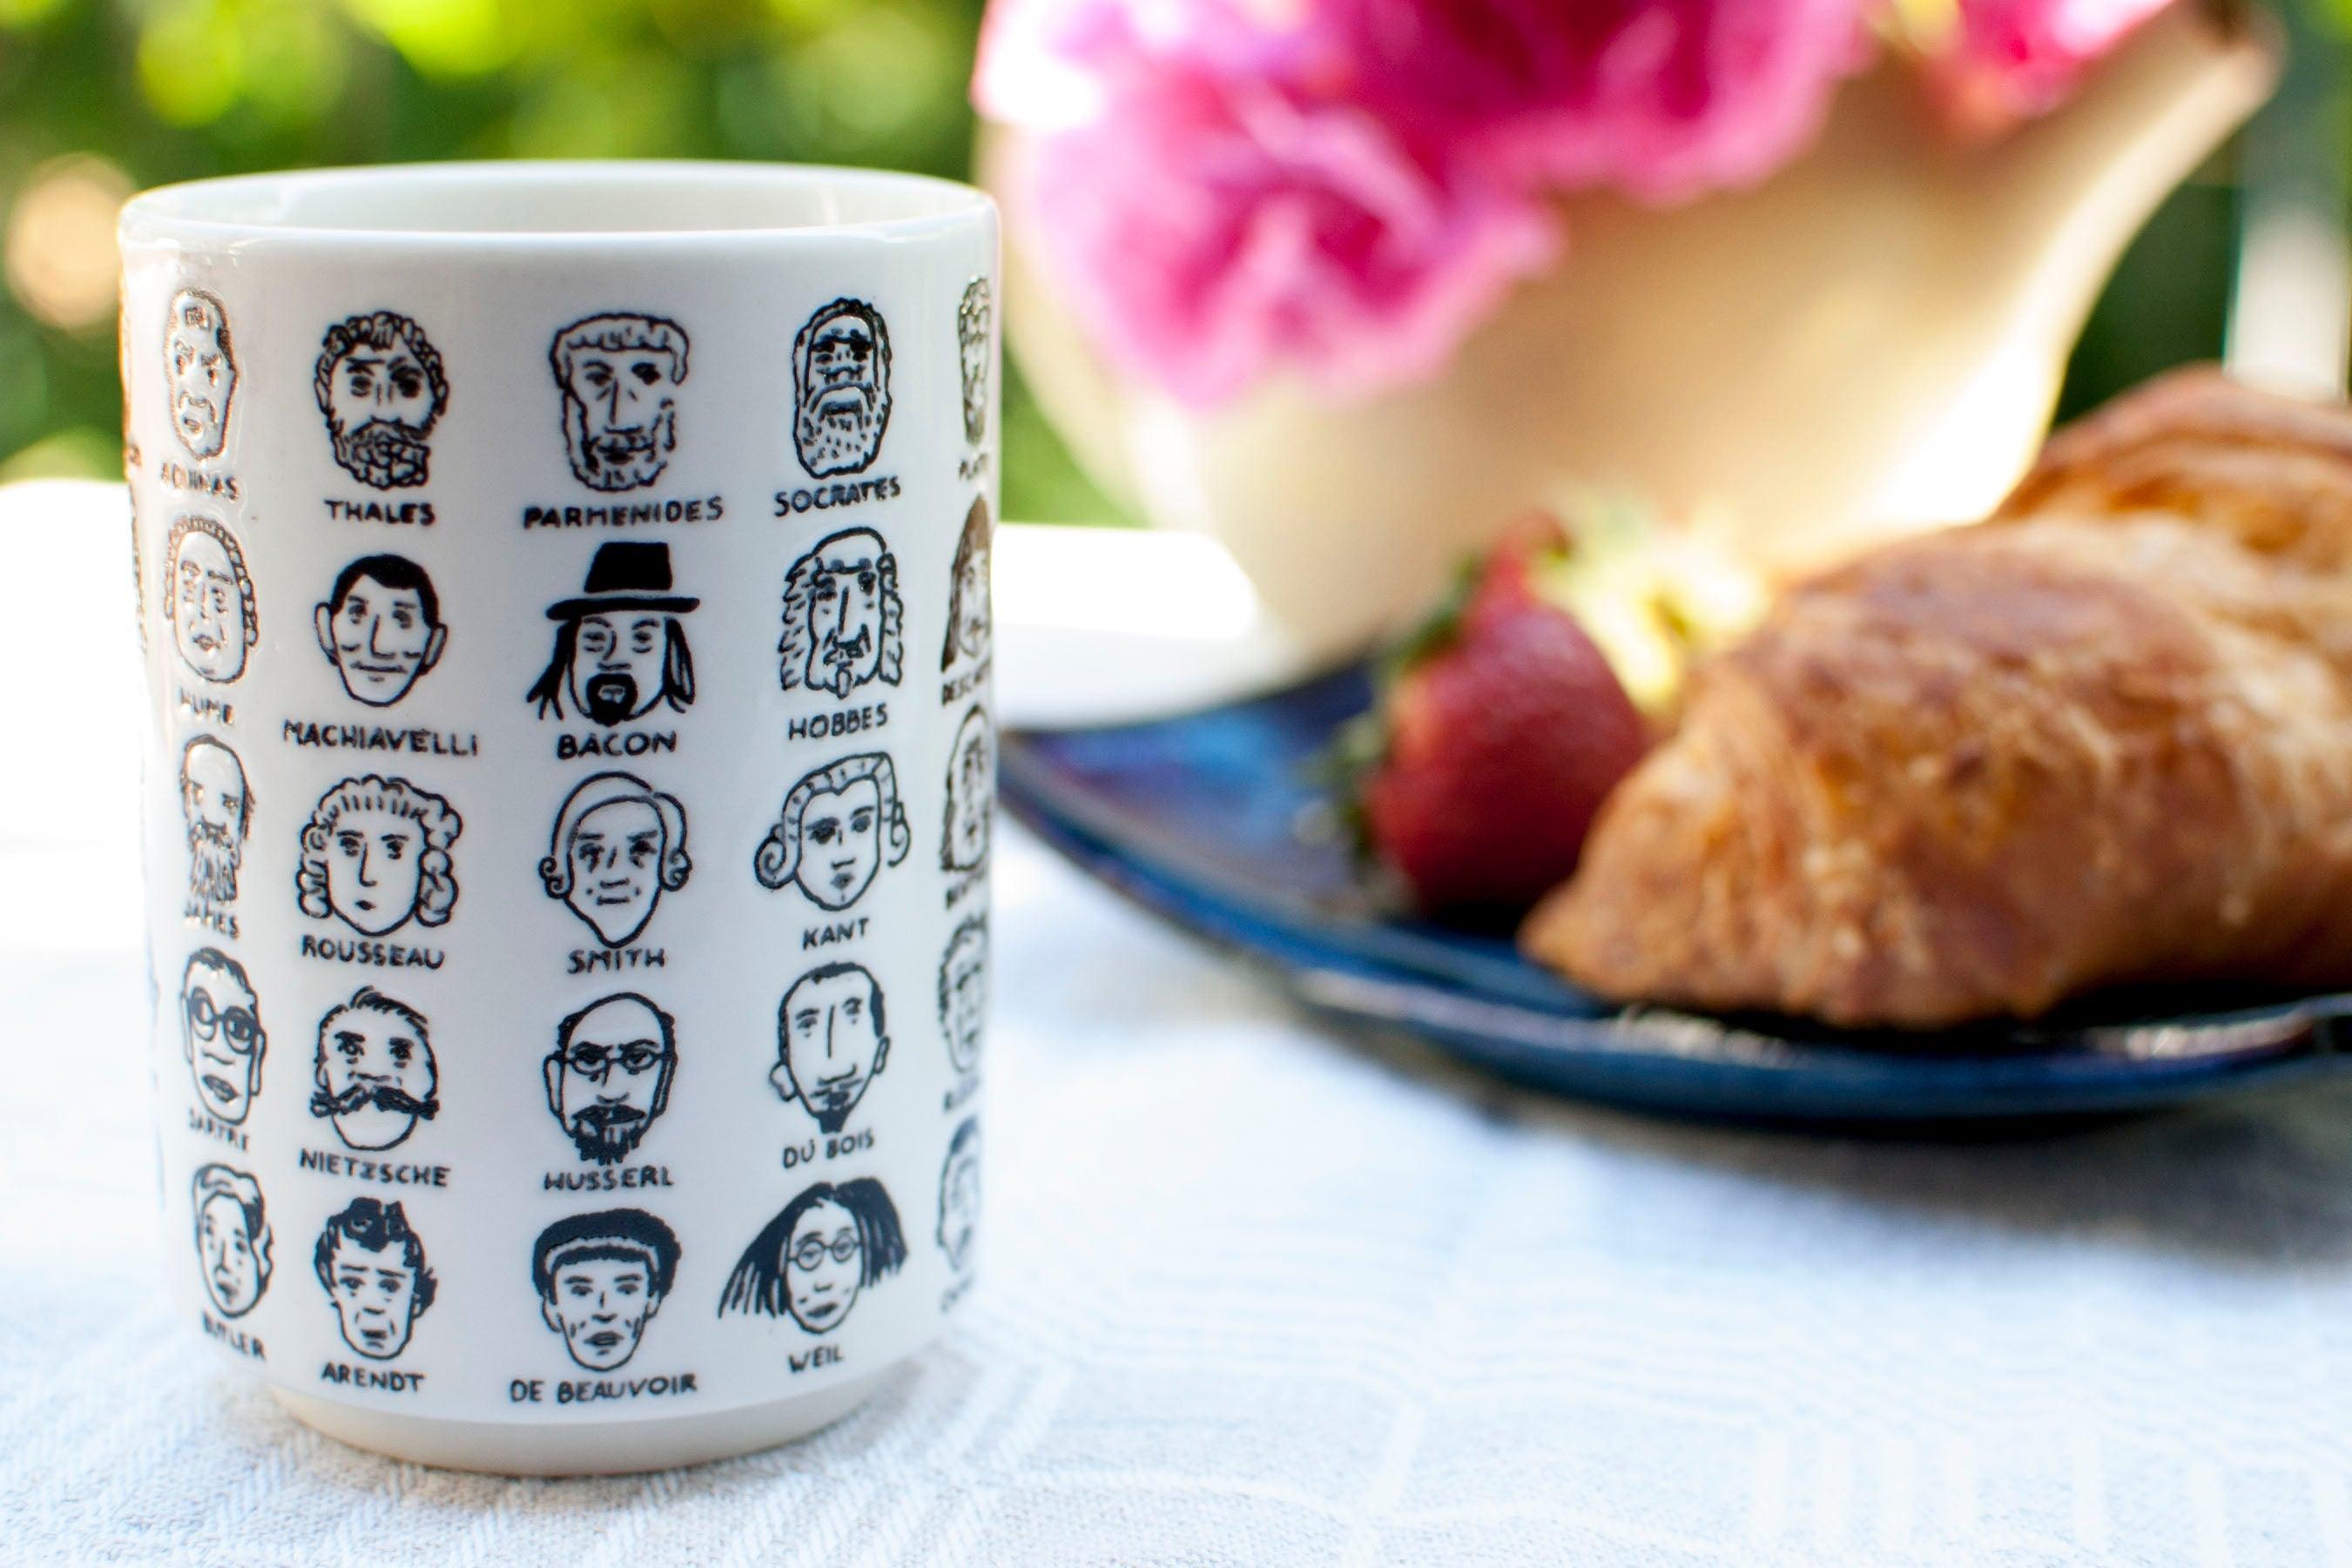 It's Hard to Get A Handle on Philosophy - Porcelain Tea Cup Featuring 60 Western Philosophers